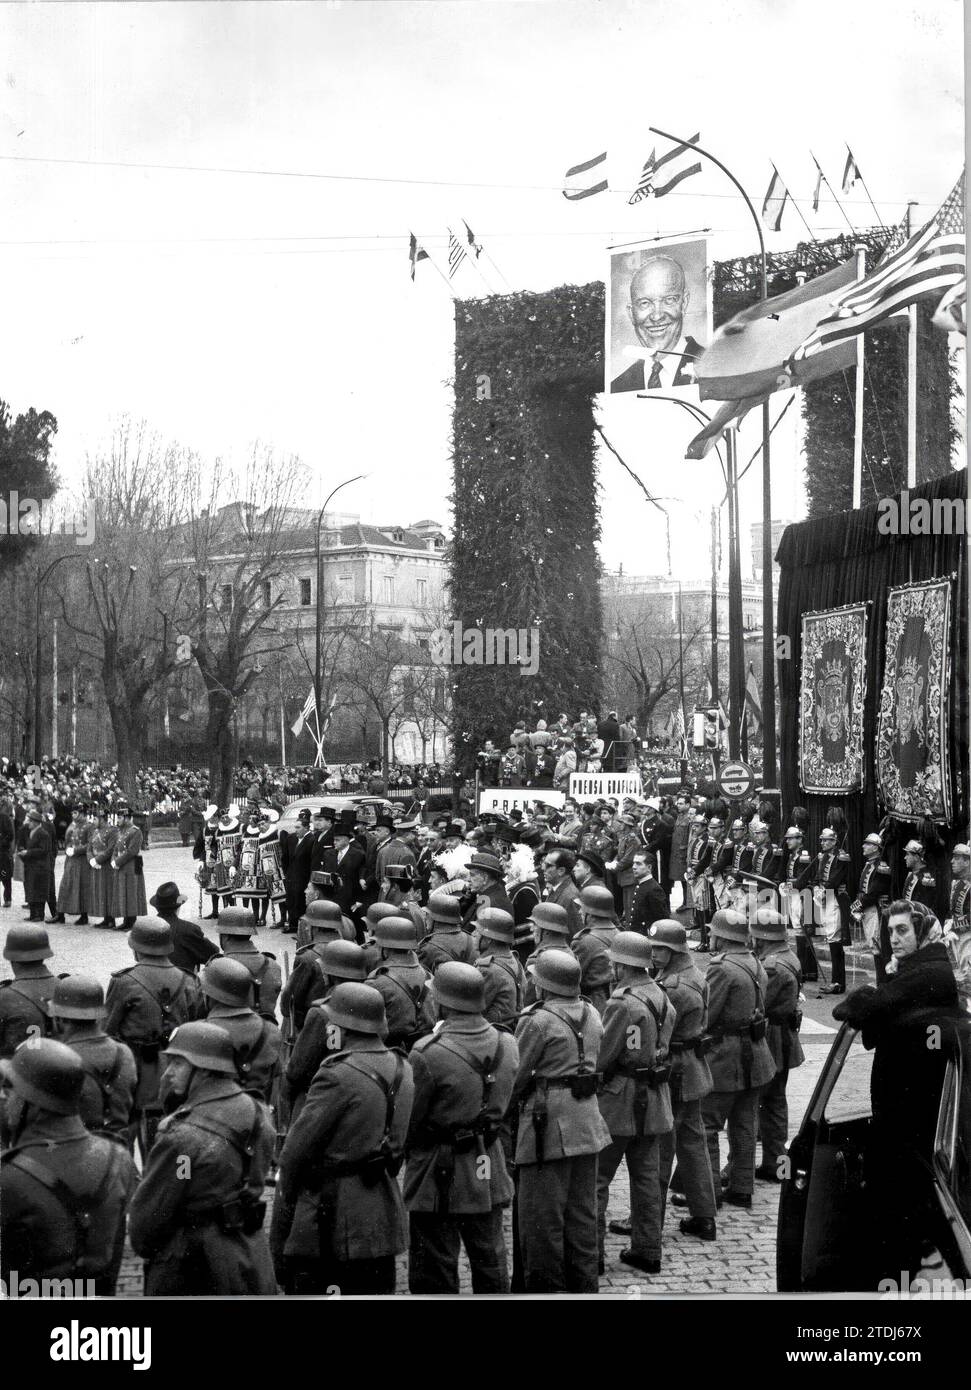 Madrid, 12/21/1959. The official reception of the City Council, the Provincial Council and Madrid authorities took place in the Castelar roundabout, before a stage installed at the confluence of Paseo de la Castellana and Calle del General Martínez Campos, and next to the enormous arch of flowers 18 meters high. high by 16 wide raised there in honor of the visitor. Credit: Album / Archivo ABC / Manuel Sanz Bermejo Stock Photo